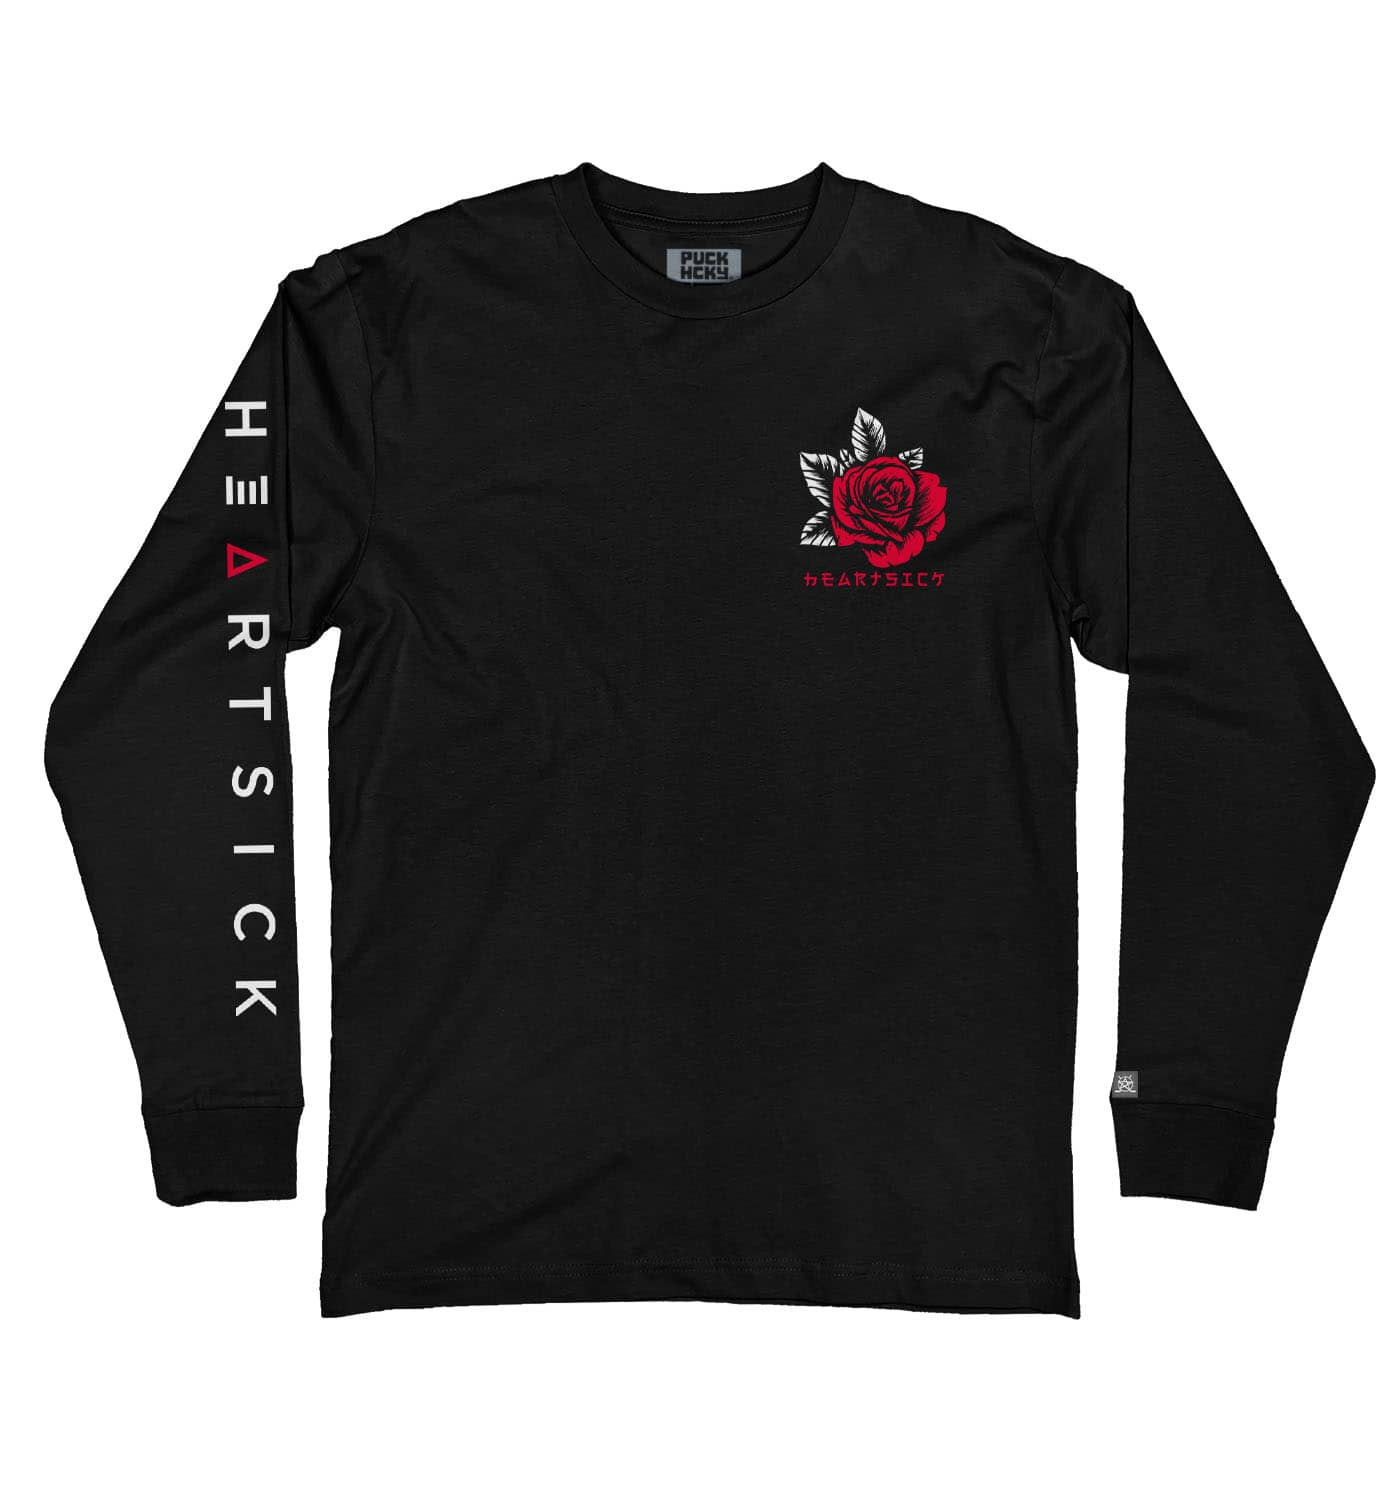 HEARTSICK ‘THE SNAKE AND THE ROSE’ long sleeve hockey t-shirt in black front view